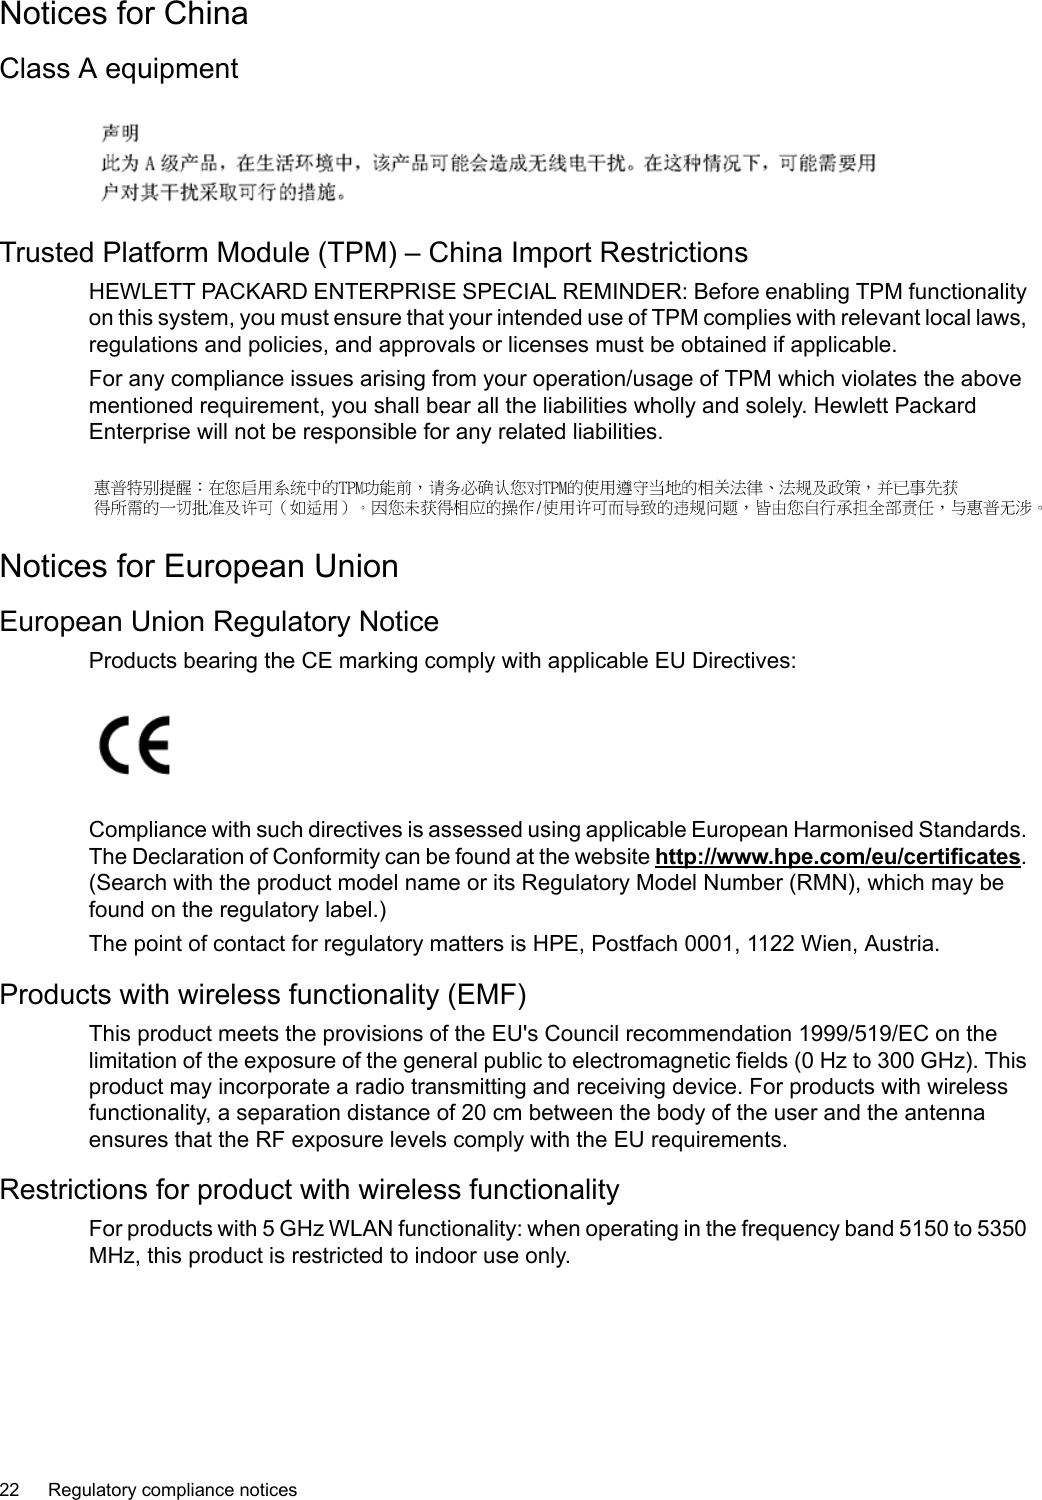 Notices for ChinaClass A equipmentTrusted Platform Module (TPM) – China Import RestrictionsHEWLETT PACKARD ENTERPRISE SPECIAL REMINDER: Before enabling TPM functionalityon this system, you must ensure that your intended use of TPM complies with relevant local laws,regulations and policies, and approvals or licenses must be obtained if applicable.For any compliance issues arising from your operation/usage of TPM which violates the abovementioned requirement, you shall bear all the liabilities wholly and solely. Hewlett PackardEnterprise will not be responsible for any related liabilities.Notices for European UnionEuropean Union Regulatory NoticeProducts bearing the CE marking comply with applicable EU Directives:Compliance with such directives is assessed using applicable European Harmonised Standards.The Declaration of Conformity can be found at the website http://www.hpe.com/eu/certificates.(Search with the product model name or its Regulatory Model Number (RMN), which may befound on the regulatory label.)The point of contact for regulatory matters is HPE, Postfach 0001, 1122 Wien, Austria.Products with wireless functionality (EMF)This product meets the provisions of the EU&apos;s Council recommendation 1999/519/EC on thelimitation of the exposure of the general public to electromagnetic fields (0 Hz to 300 GHz). Thisproduct may incorporate a radio transmitting and receiving device. For products with wirelessfunctionality, a separation distance of 20 cm between the body of the user and the antennaensures that the RF exposure levels comply with the EU requirements.Restrictions for product with wireless functionalityFor products with 5GHz WLAN functionality: when operating in the frequency band 5150 to 5350MHz, this product is restricted to indoor use only.22 Regulatory compliance notices